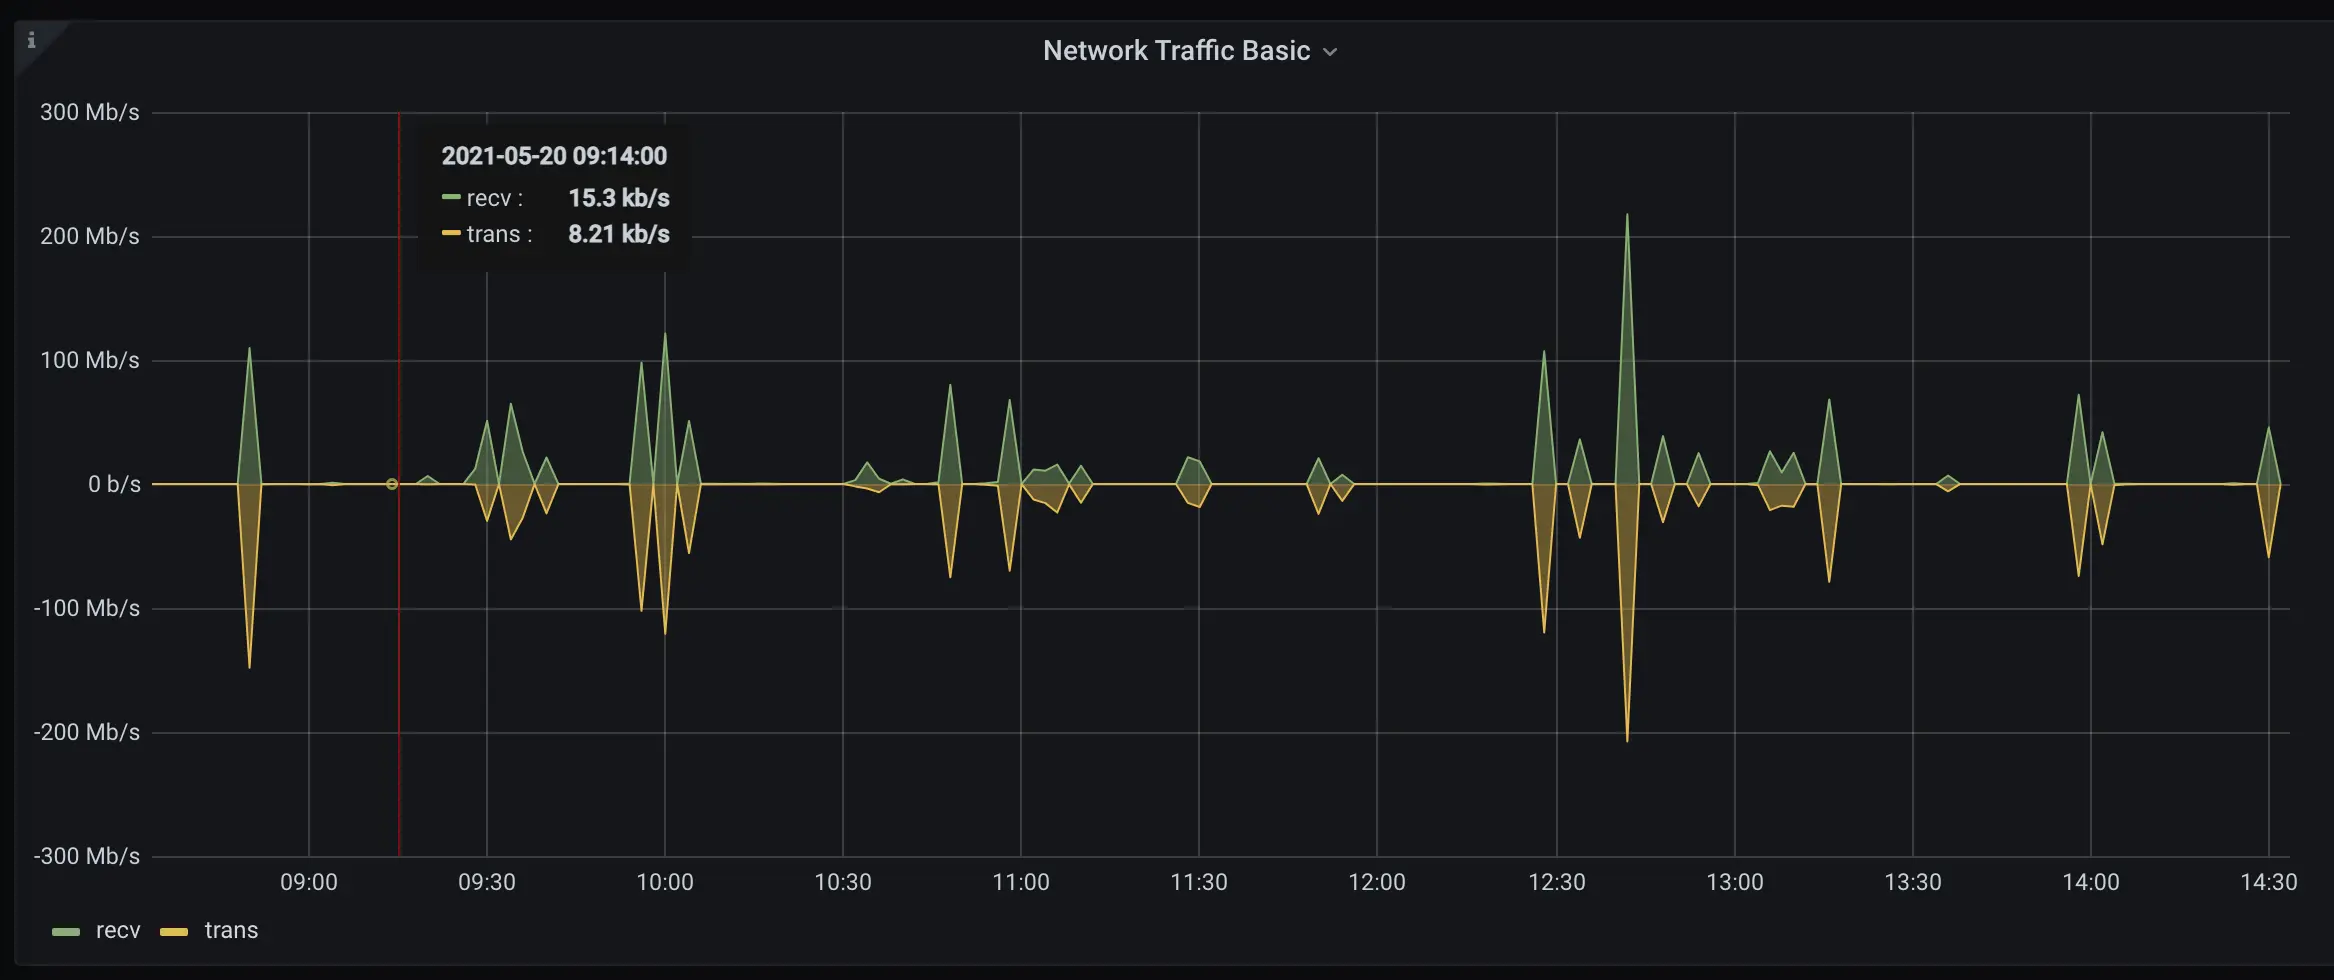 A graph of network traffic